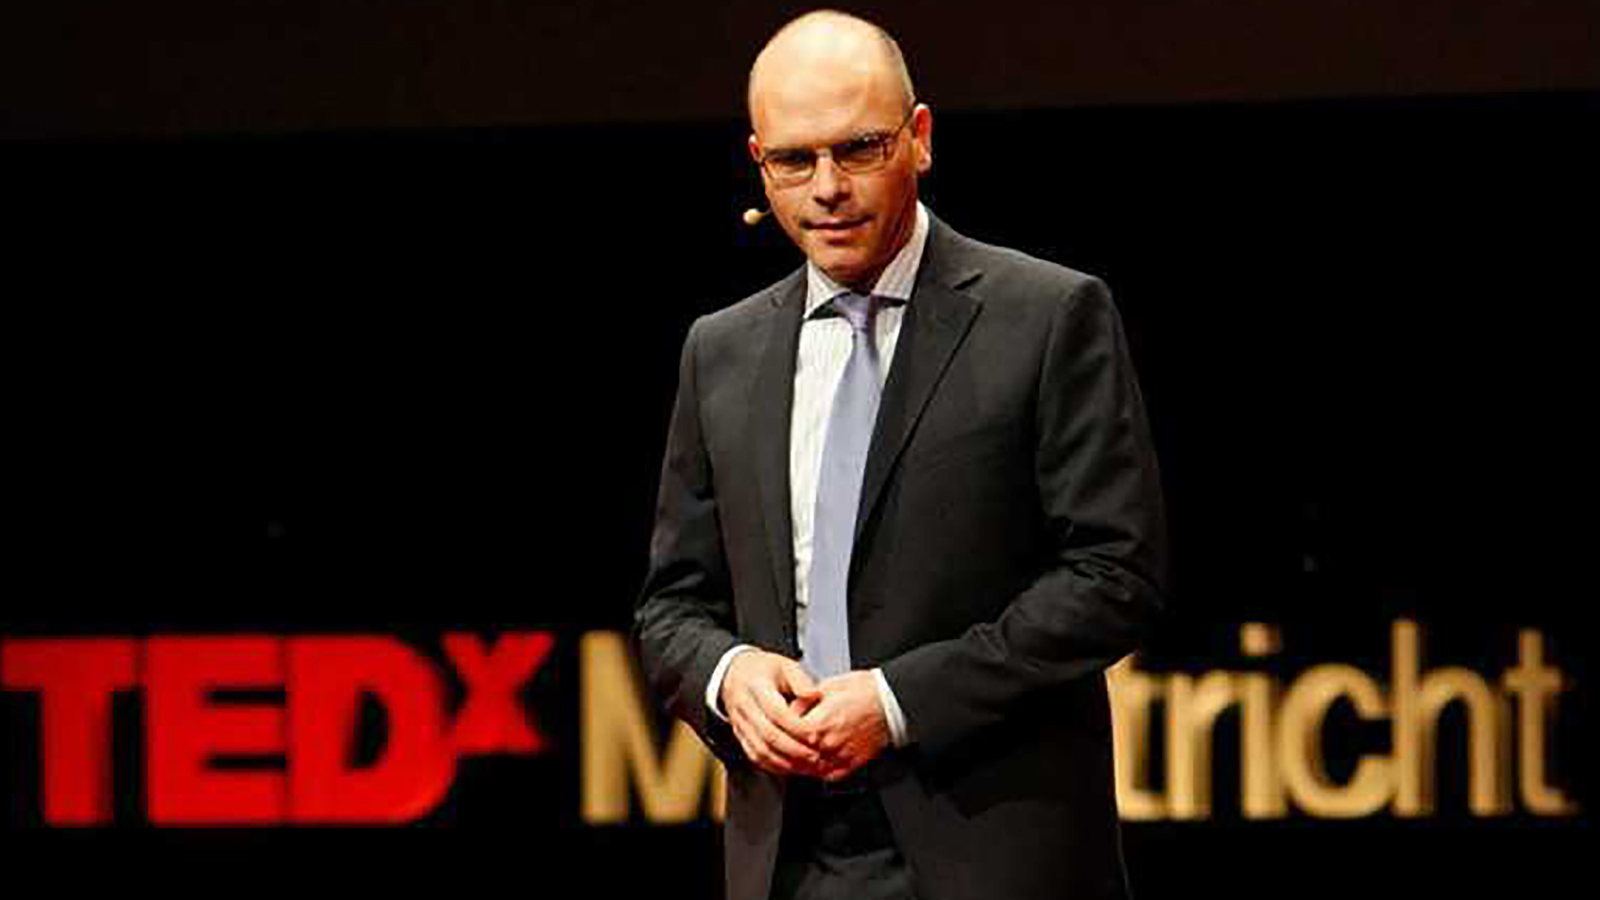 Bald man with glasses speaking at a TED Talk